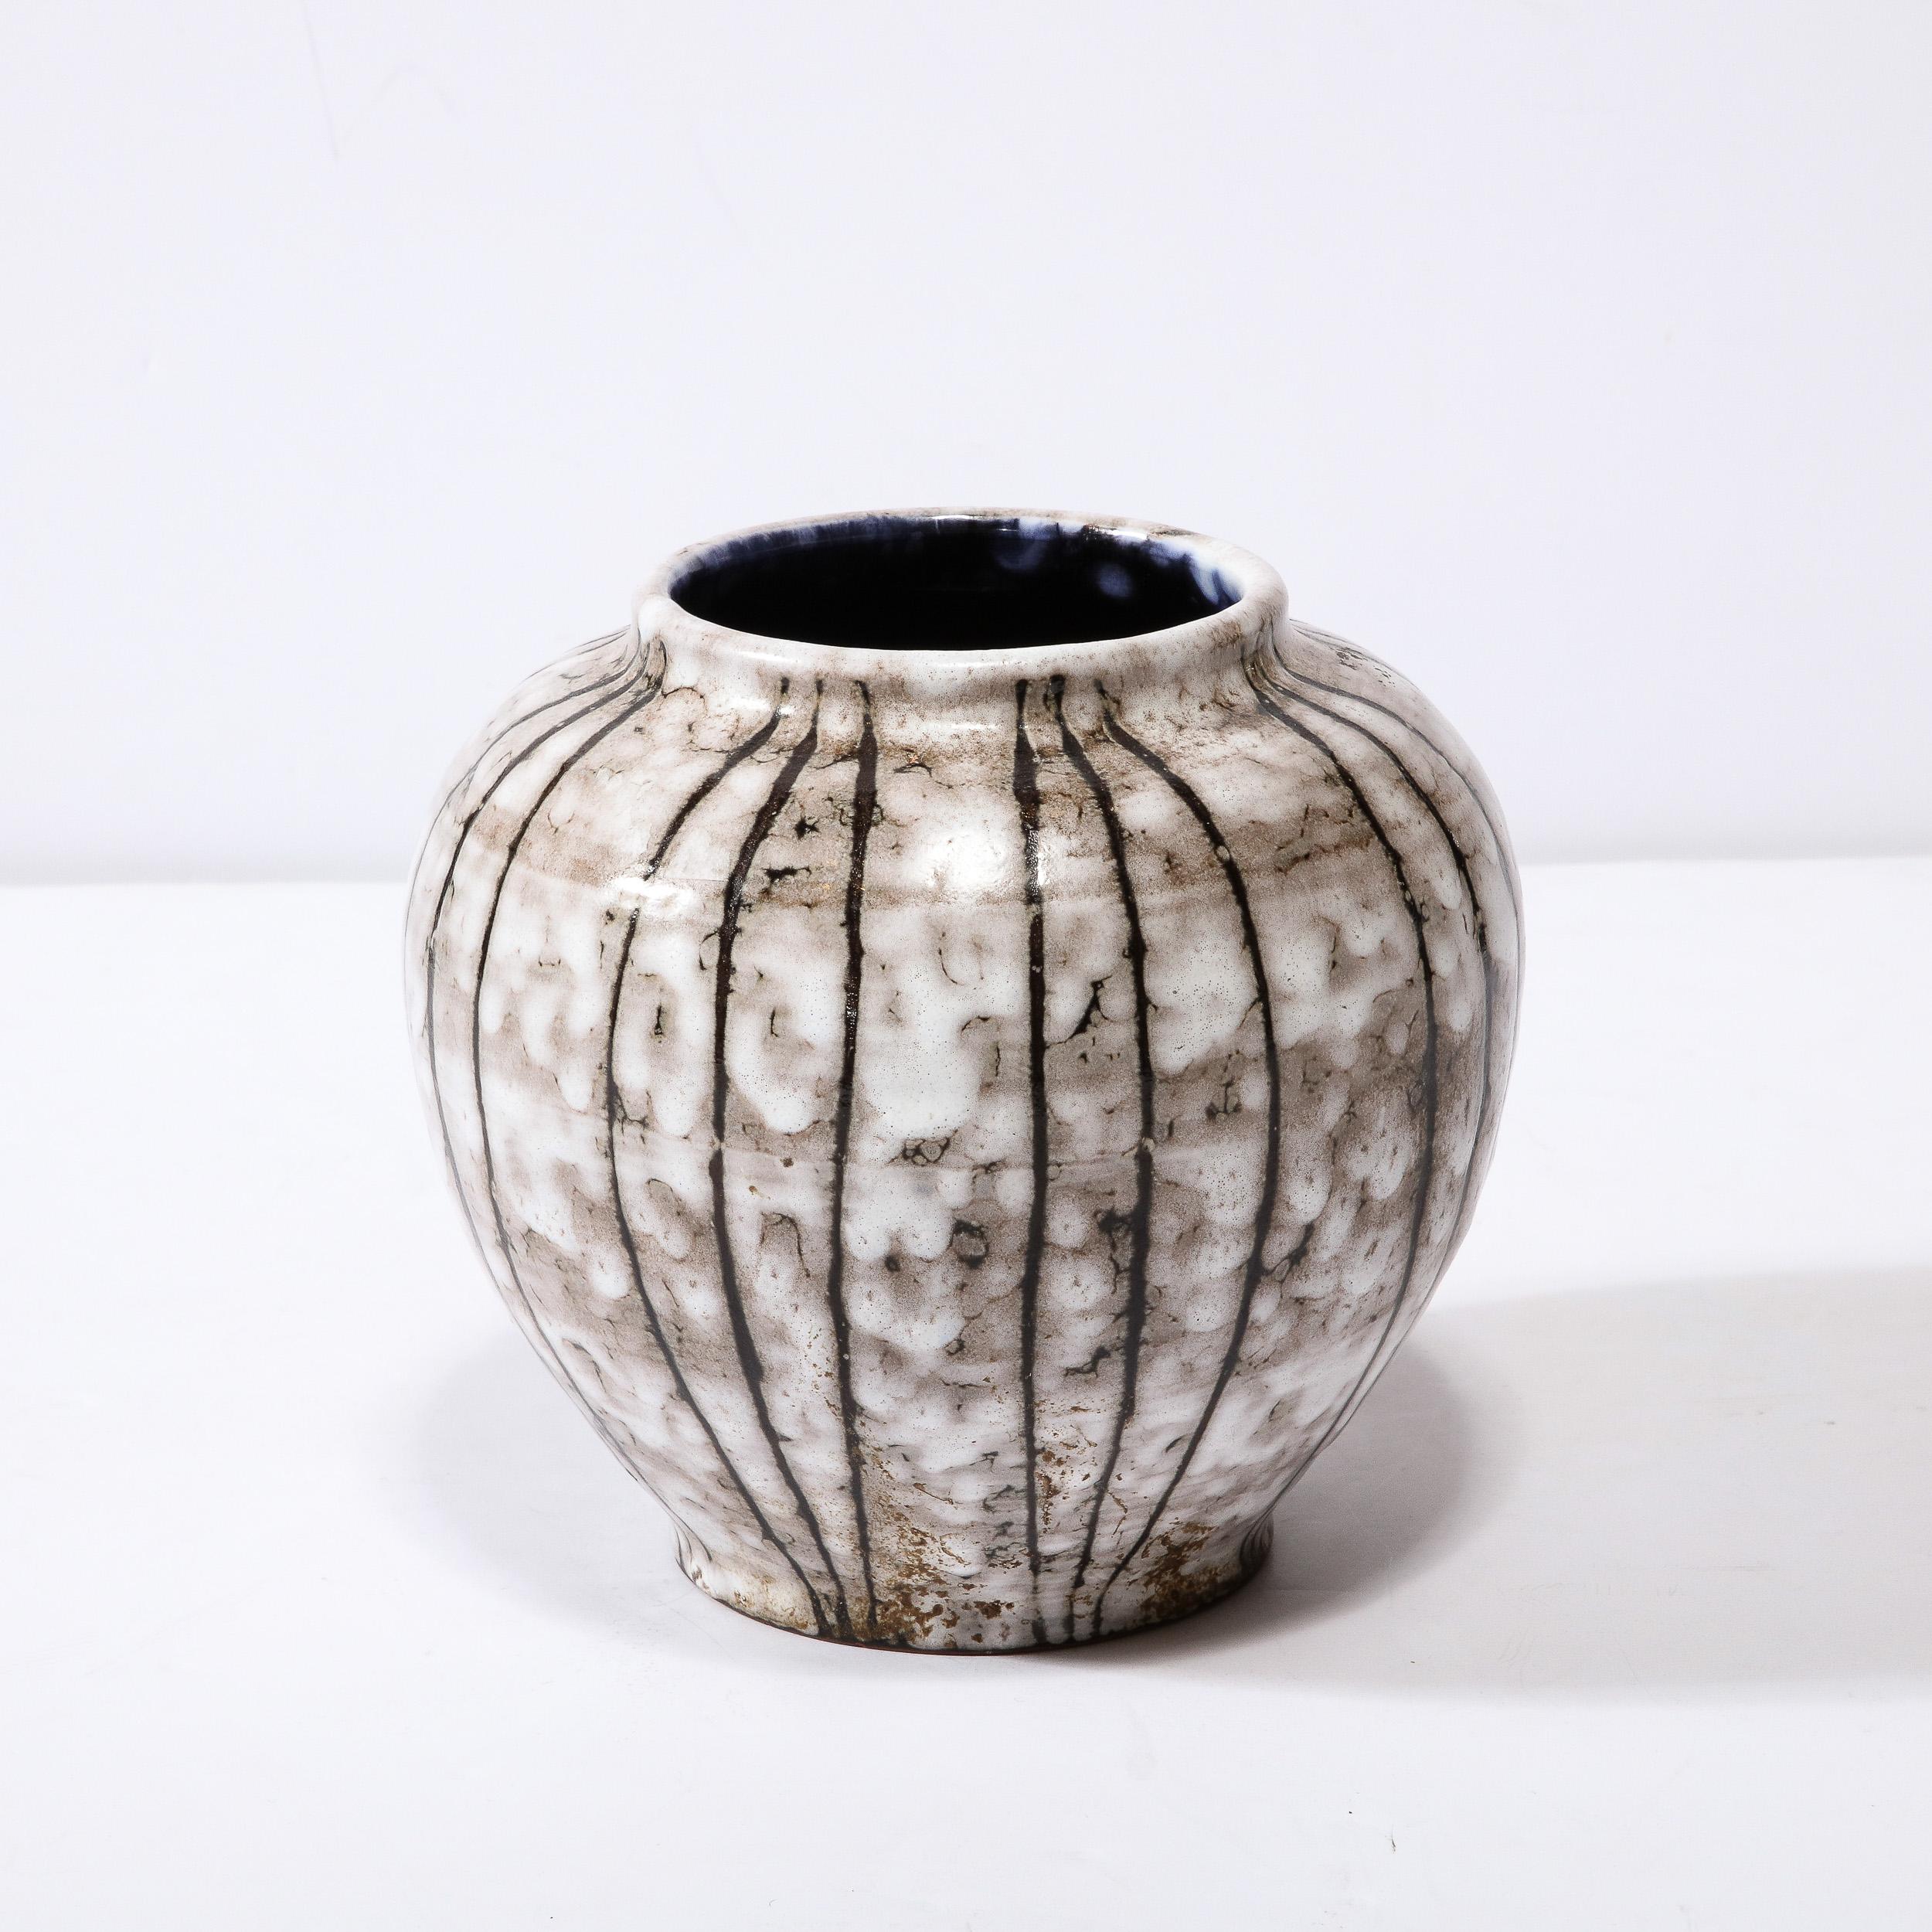 This Mid-Century Modernist Ceramic vase W/ Bowed Line Work is a beautiful example of Post War European Ceramics, realized in Hódmezovasarhely Majolikagyár, Hungary Circa 1960. With a Stunning textural finish composed in Cream White and Blackened